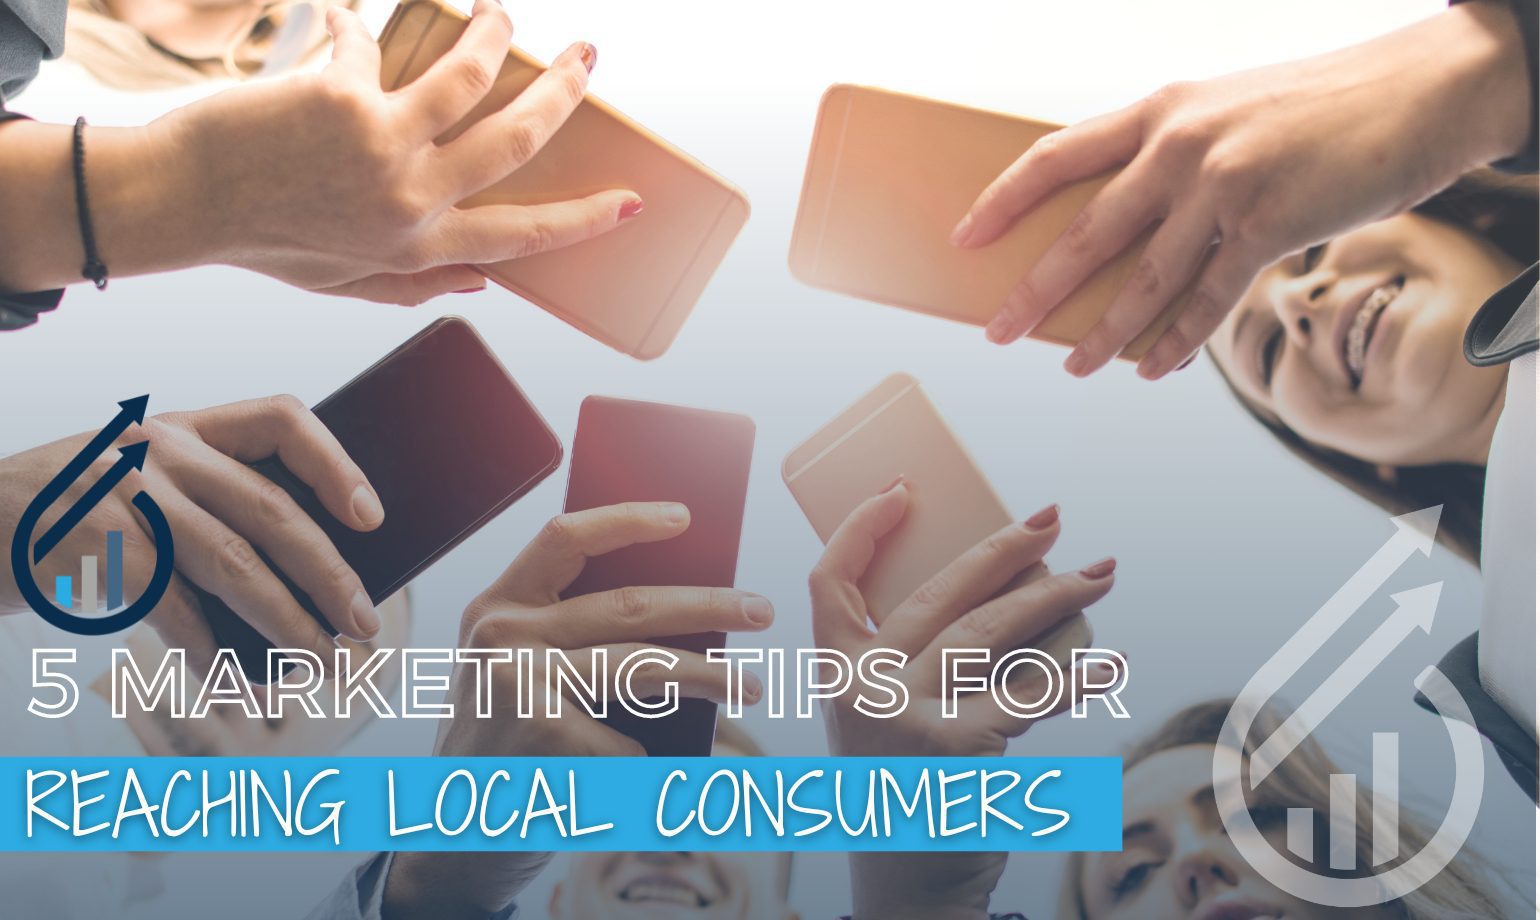 5 Marketing Tips for Reaching Local Consumers